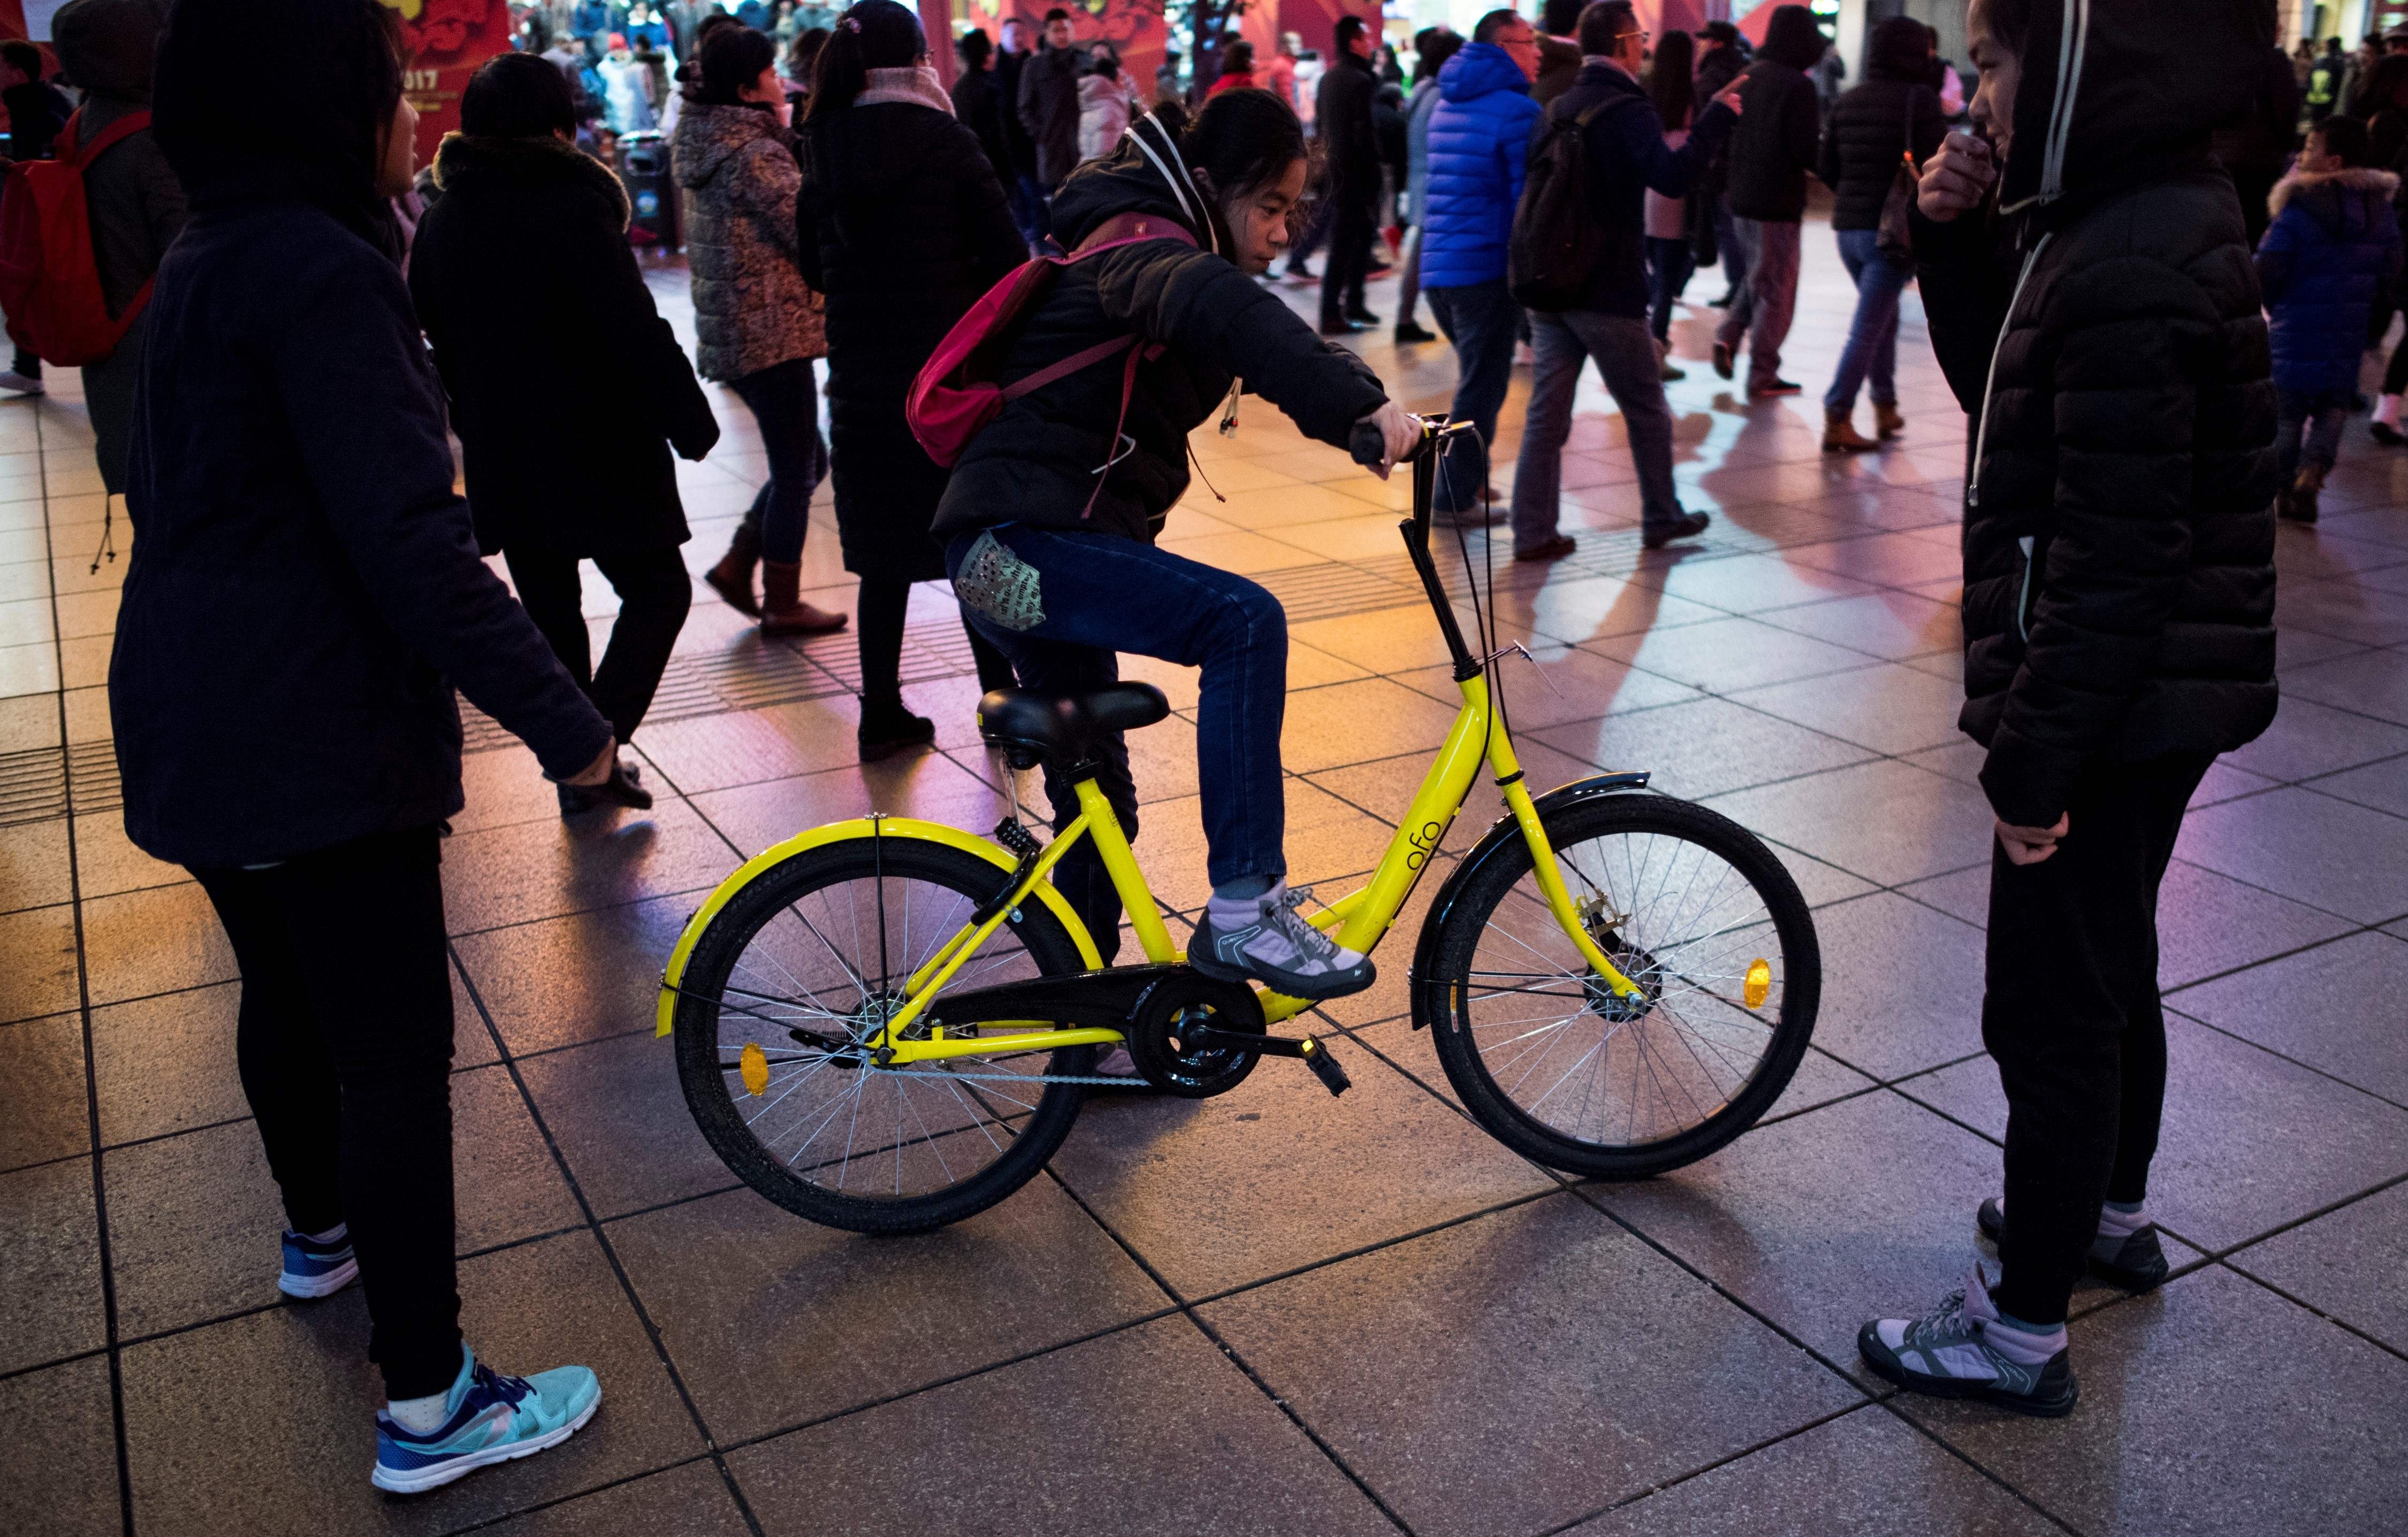 Bicycle sharing start-ups, such as OFO, have generated huge buzz in China this year, raising the profile of entrepreneurship amount the nation’s youth. Photo: AFP